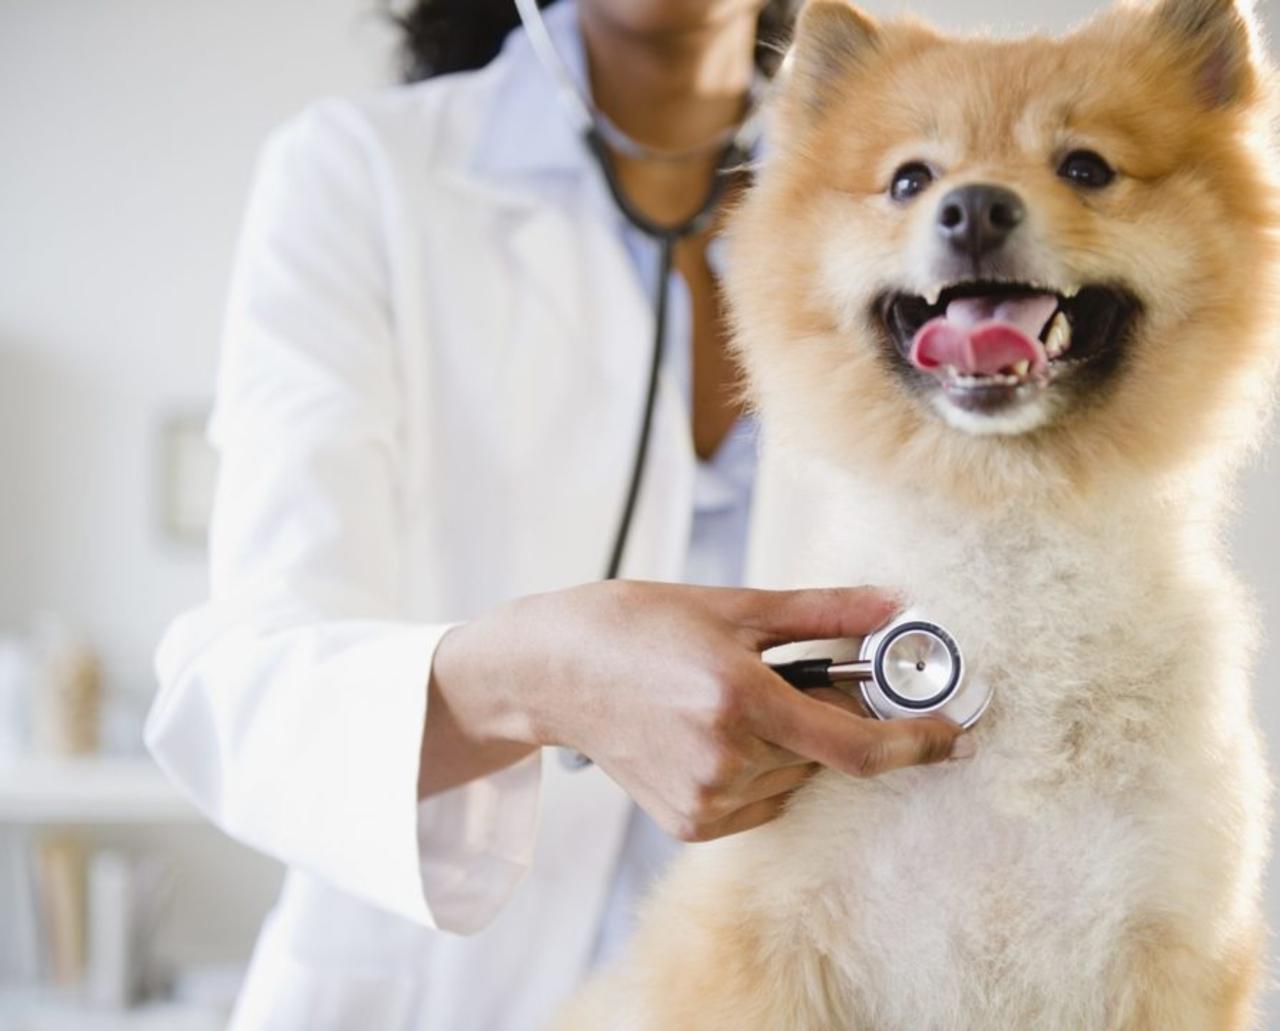 All About Pet Insurance: What Does It Cover, and Should You Purchase a Plan?